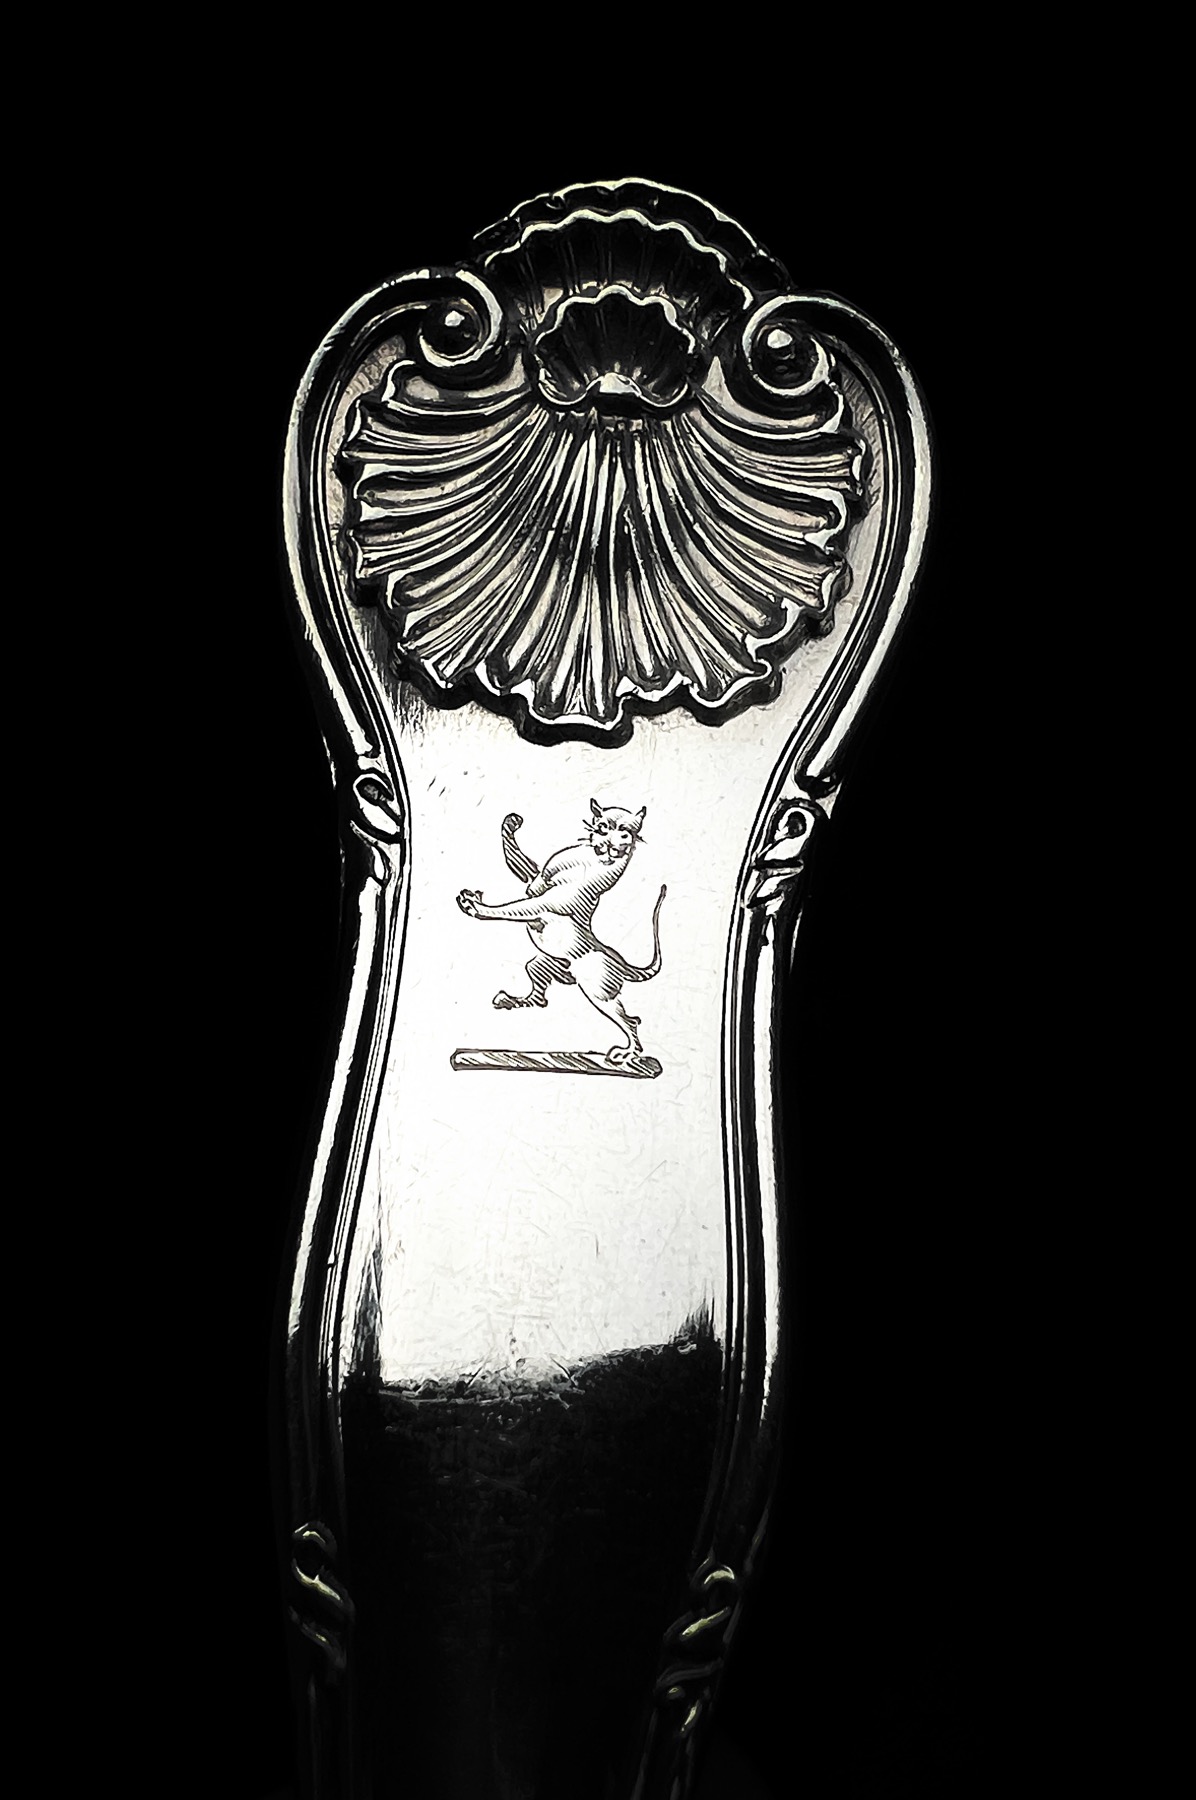 Macintosh Clan Family Crest, on Sterling Silver at Moorabool Antiques, Geelong, Australia